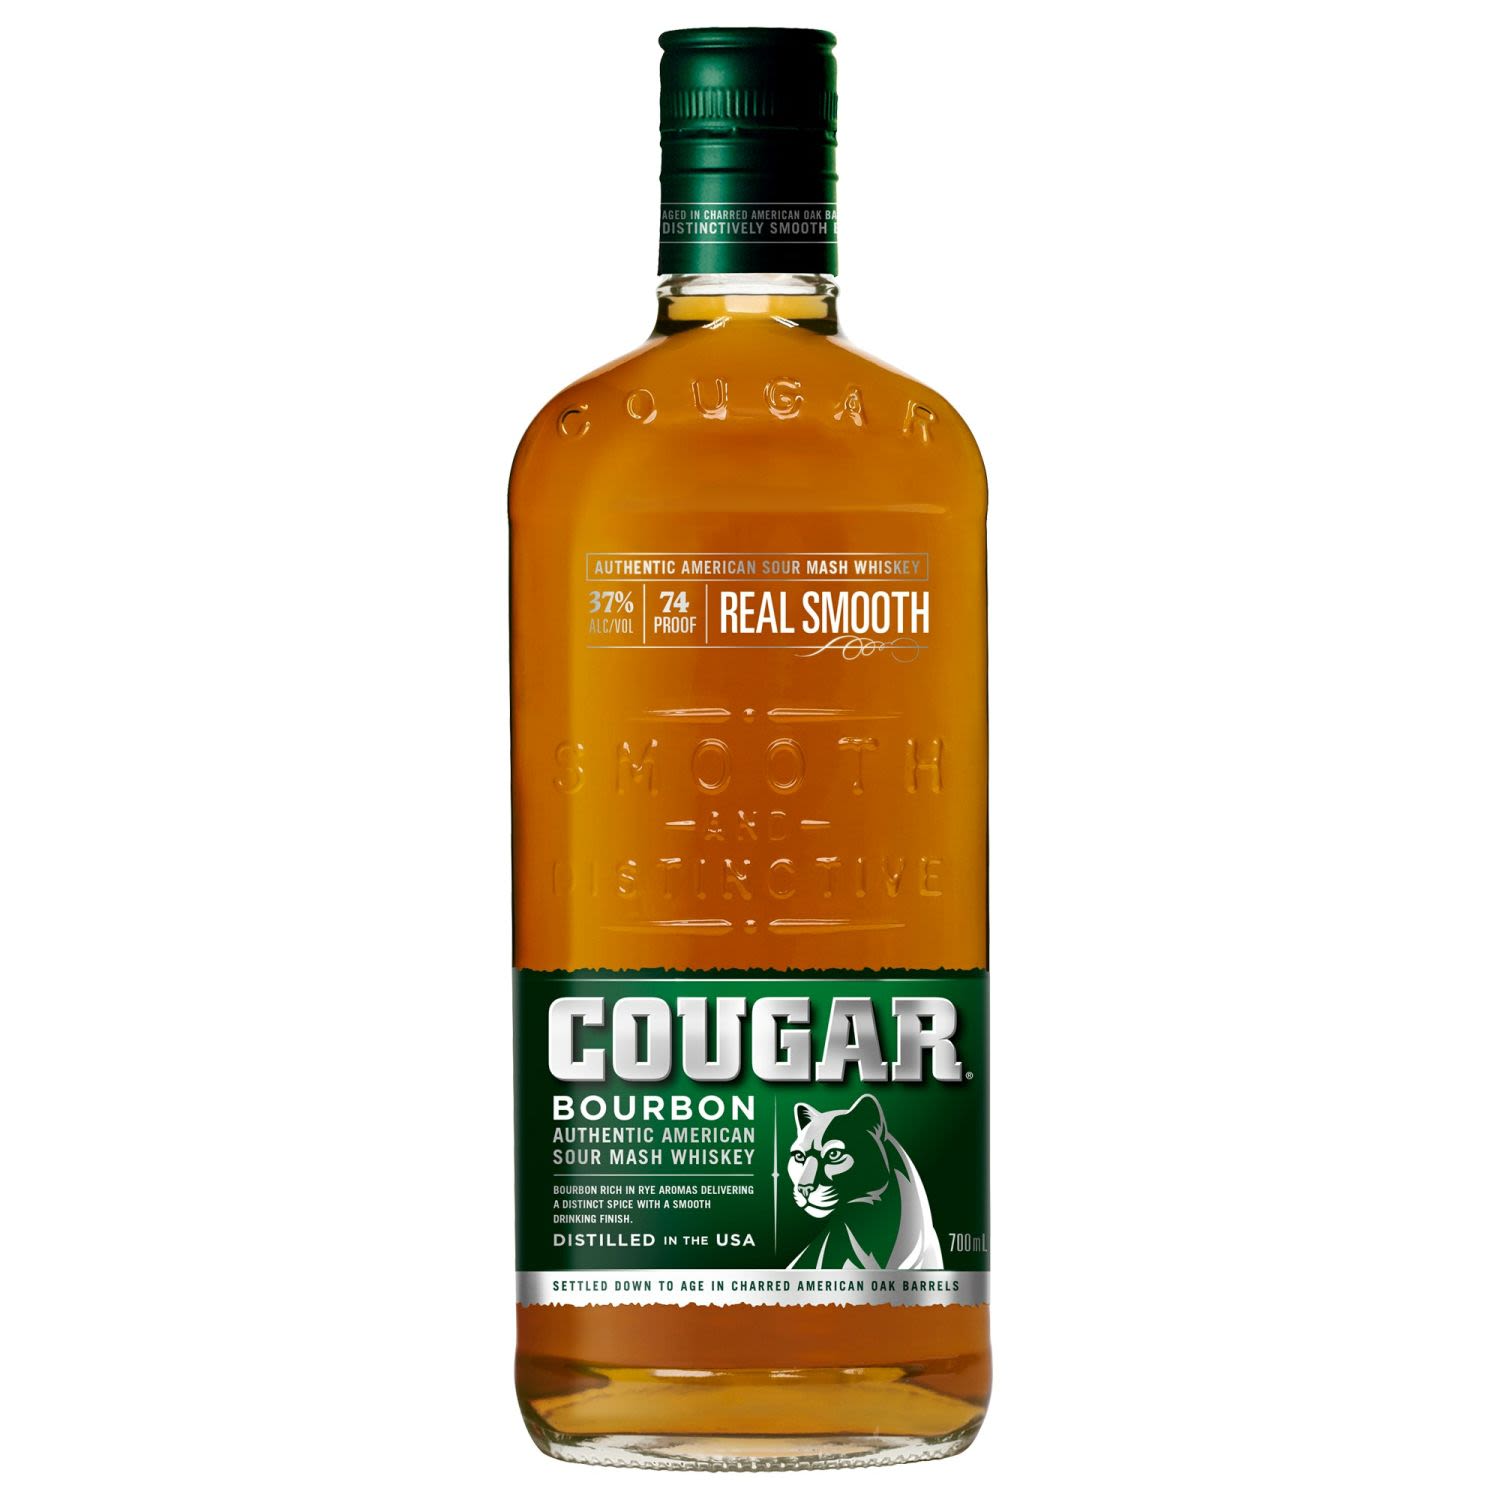 For years Cougar Bourbon had been perfecting this authentic sour mash recipe, utilising generations of experience to create a smooth bourbon whiskey. It all starts with the freshest local corn, grains, and pure aquifer water. Cougar is distilled using only the most traditional methods and then settled down in charred American oak barrels. The result is a smooth bourbon deep in character and rich in rye aromas, delivering a distinct spice with a smooth drinking finish. </p>
<p><br></p>
<p><strong>Country of Origin:</strong> USA</p>
<p><br></p>
<p><strong>Alcohol/Vol: </strong>37.00%</p>
<p><br></p>
<p><strong>Standard Drinks:</strong> 20</p>
<p><br></p>
<p><strong>Pack:</strong> Bottle</p><br /> <br />Alcohol Volume: 37.00%<br /><br />Pack Format: Bottle<br /><br />Standard Drinks: 20</br /><br />Pack Type: Bottle<br /><br />Country of Origin: USA<br />